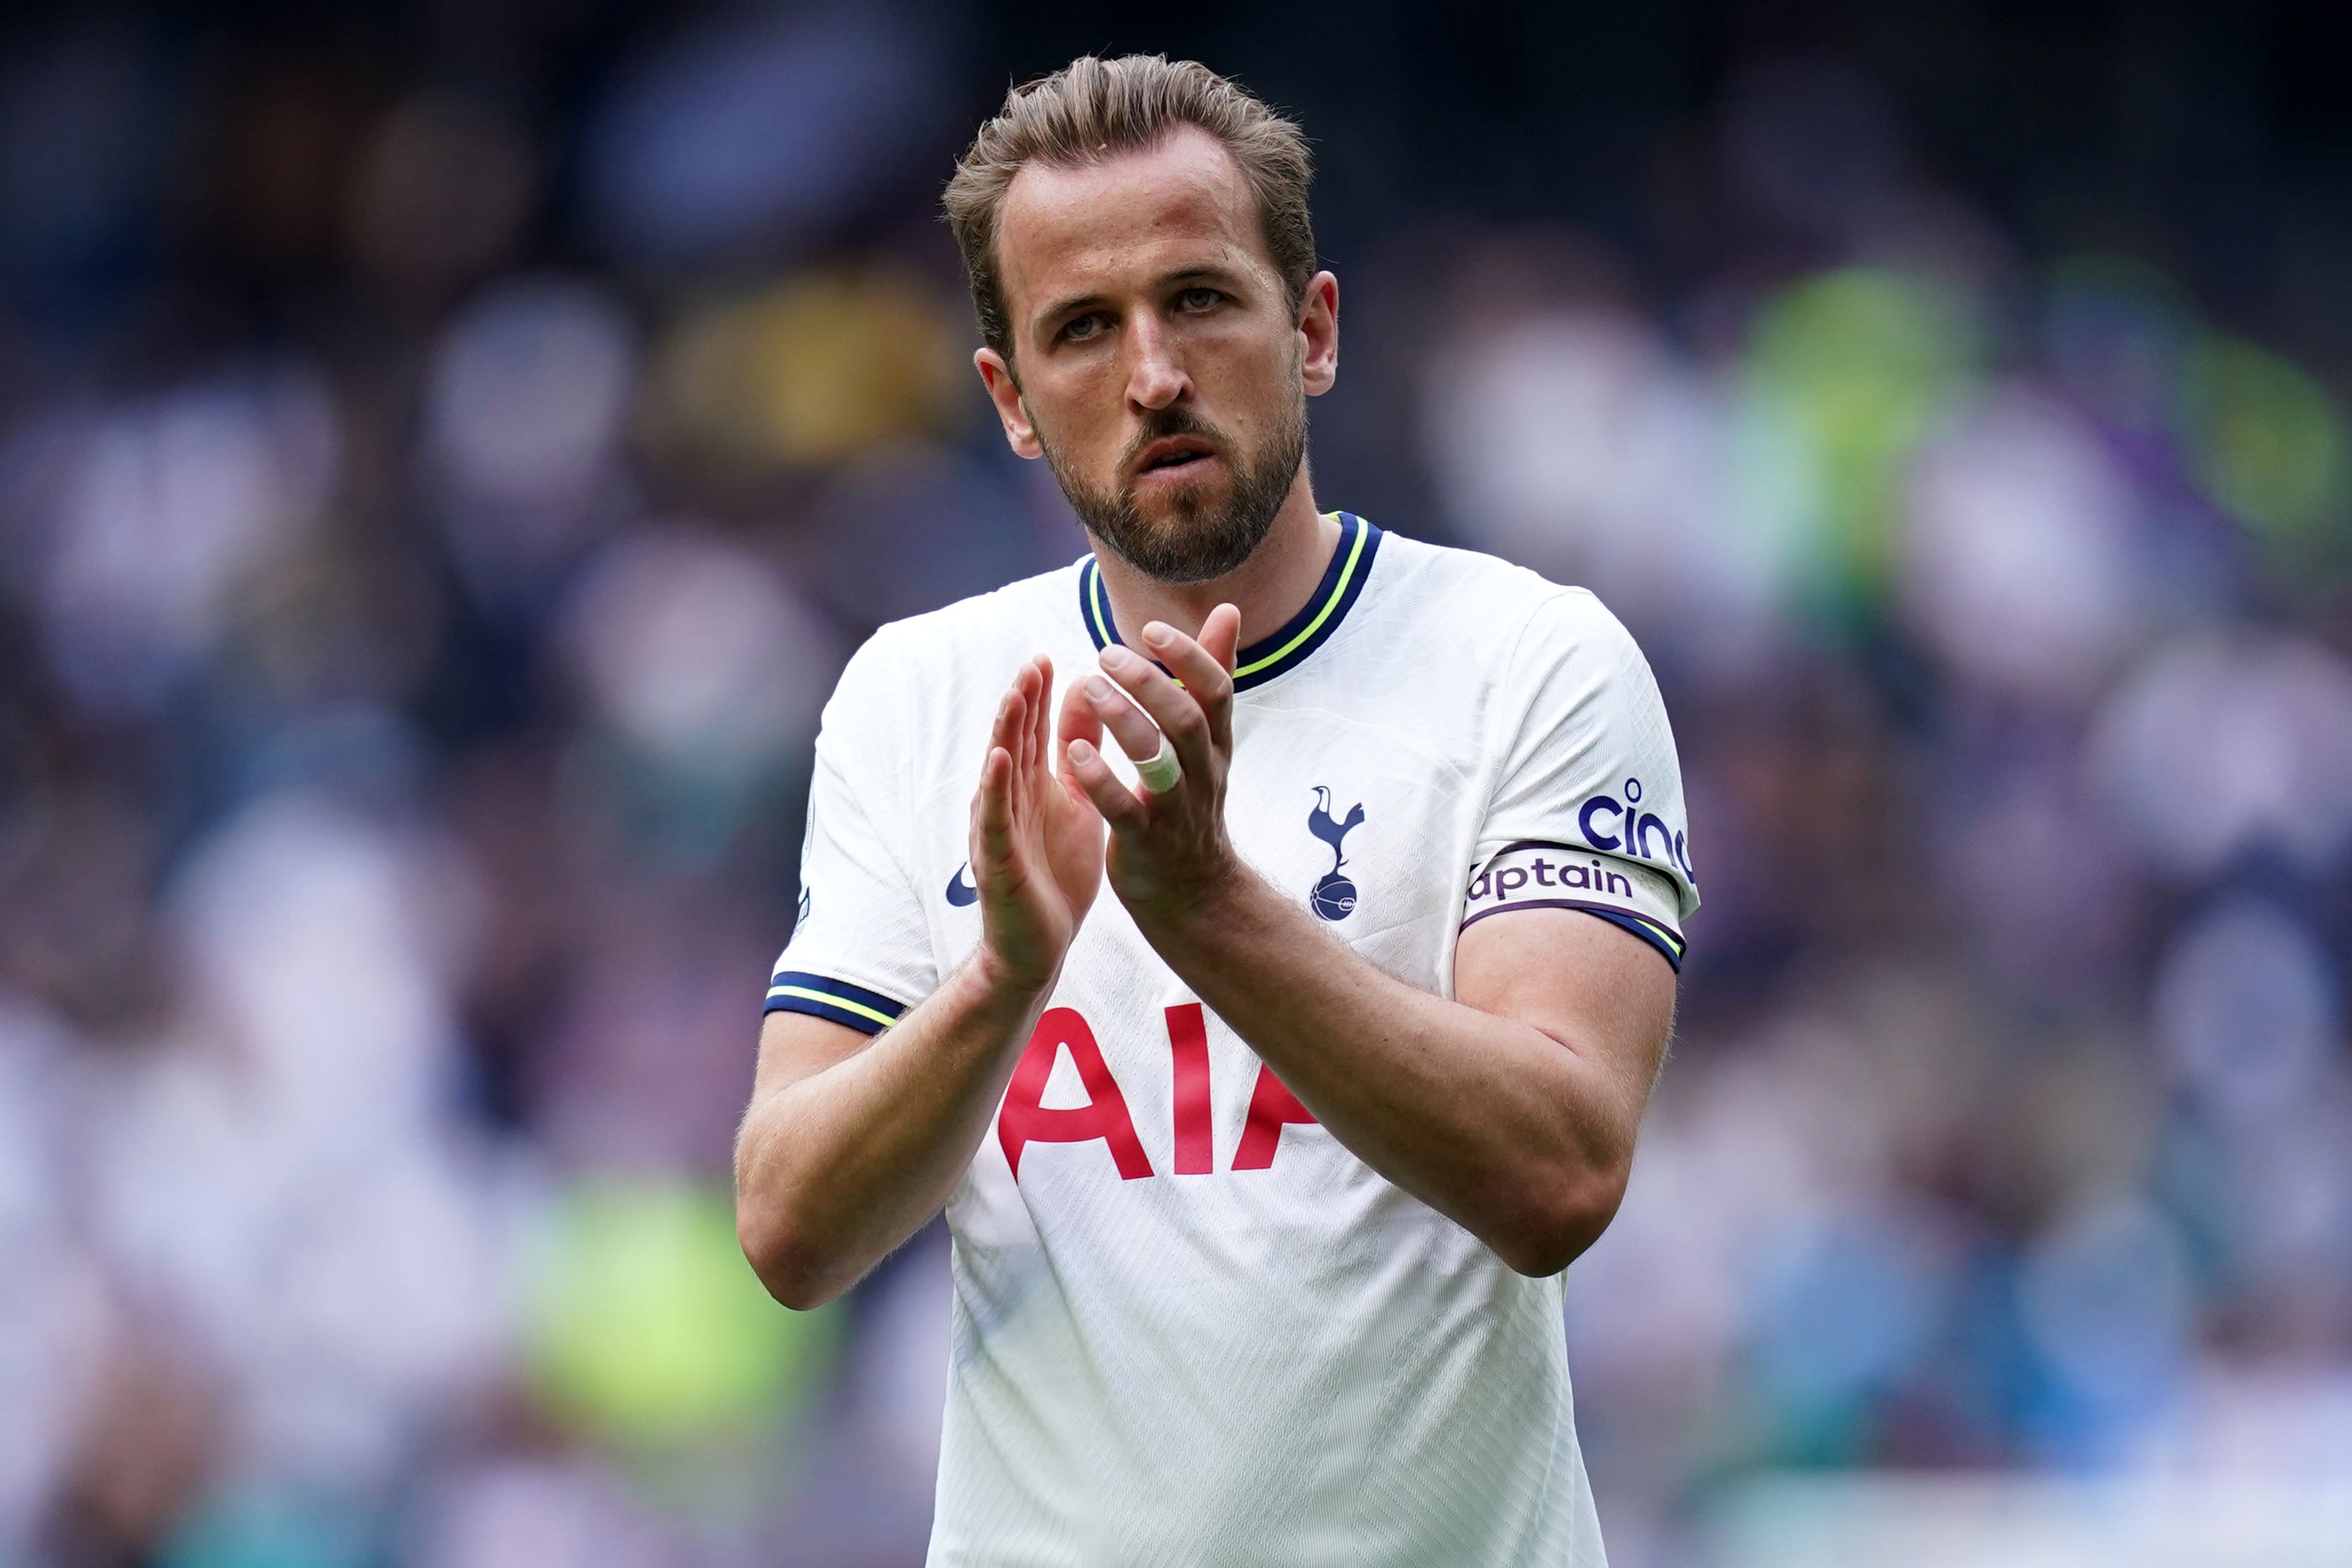  Harry Kane, the captain of Tottenham Hotspur, is applauding the crowd after a match.